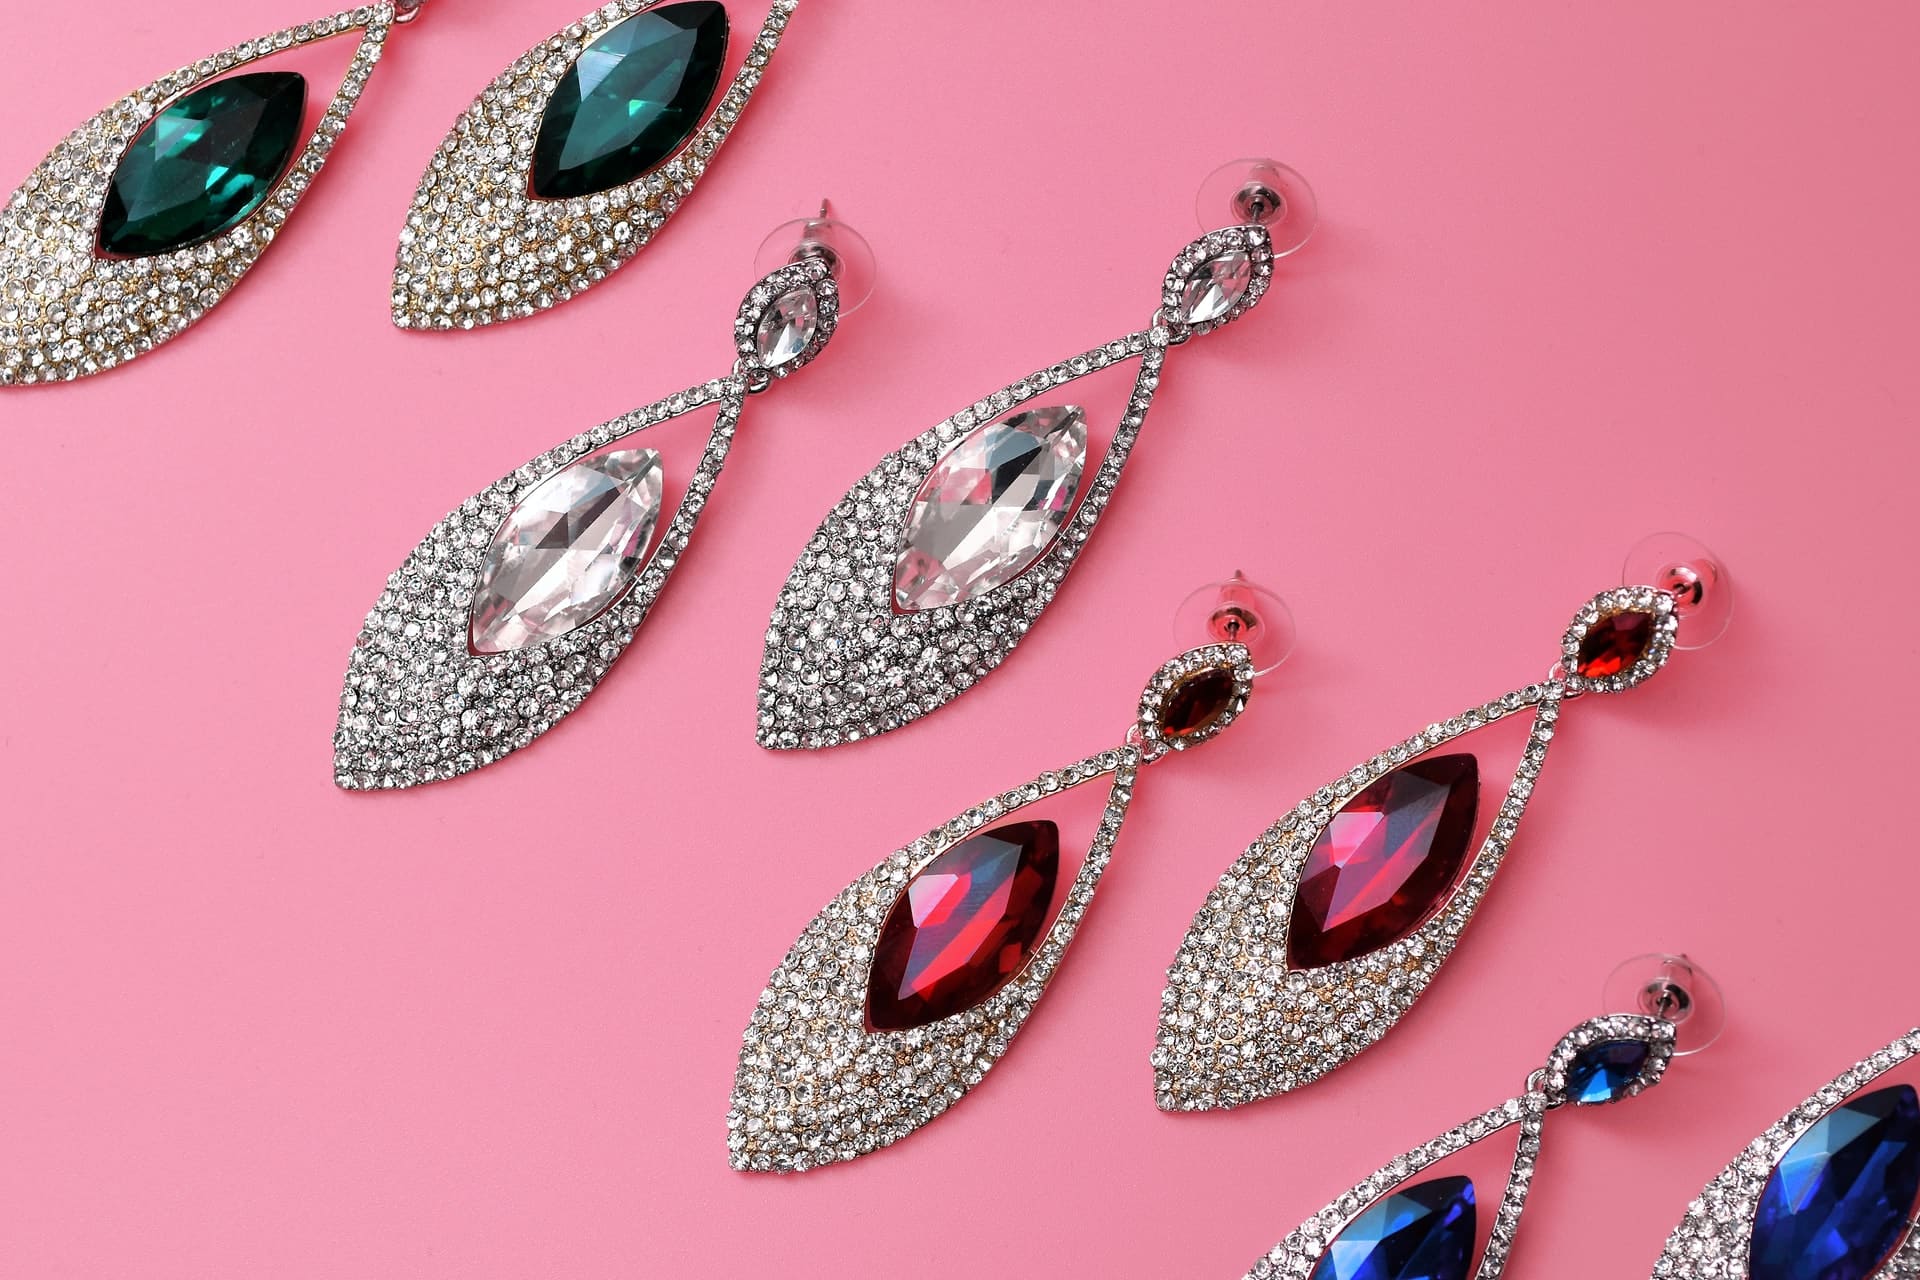 Many earrings with different gemstones against a pink background.